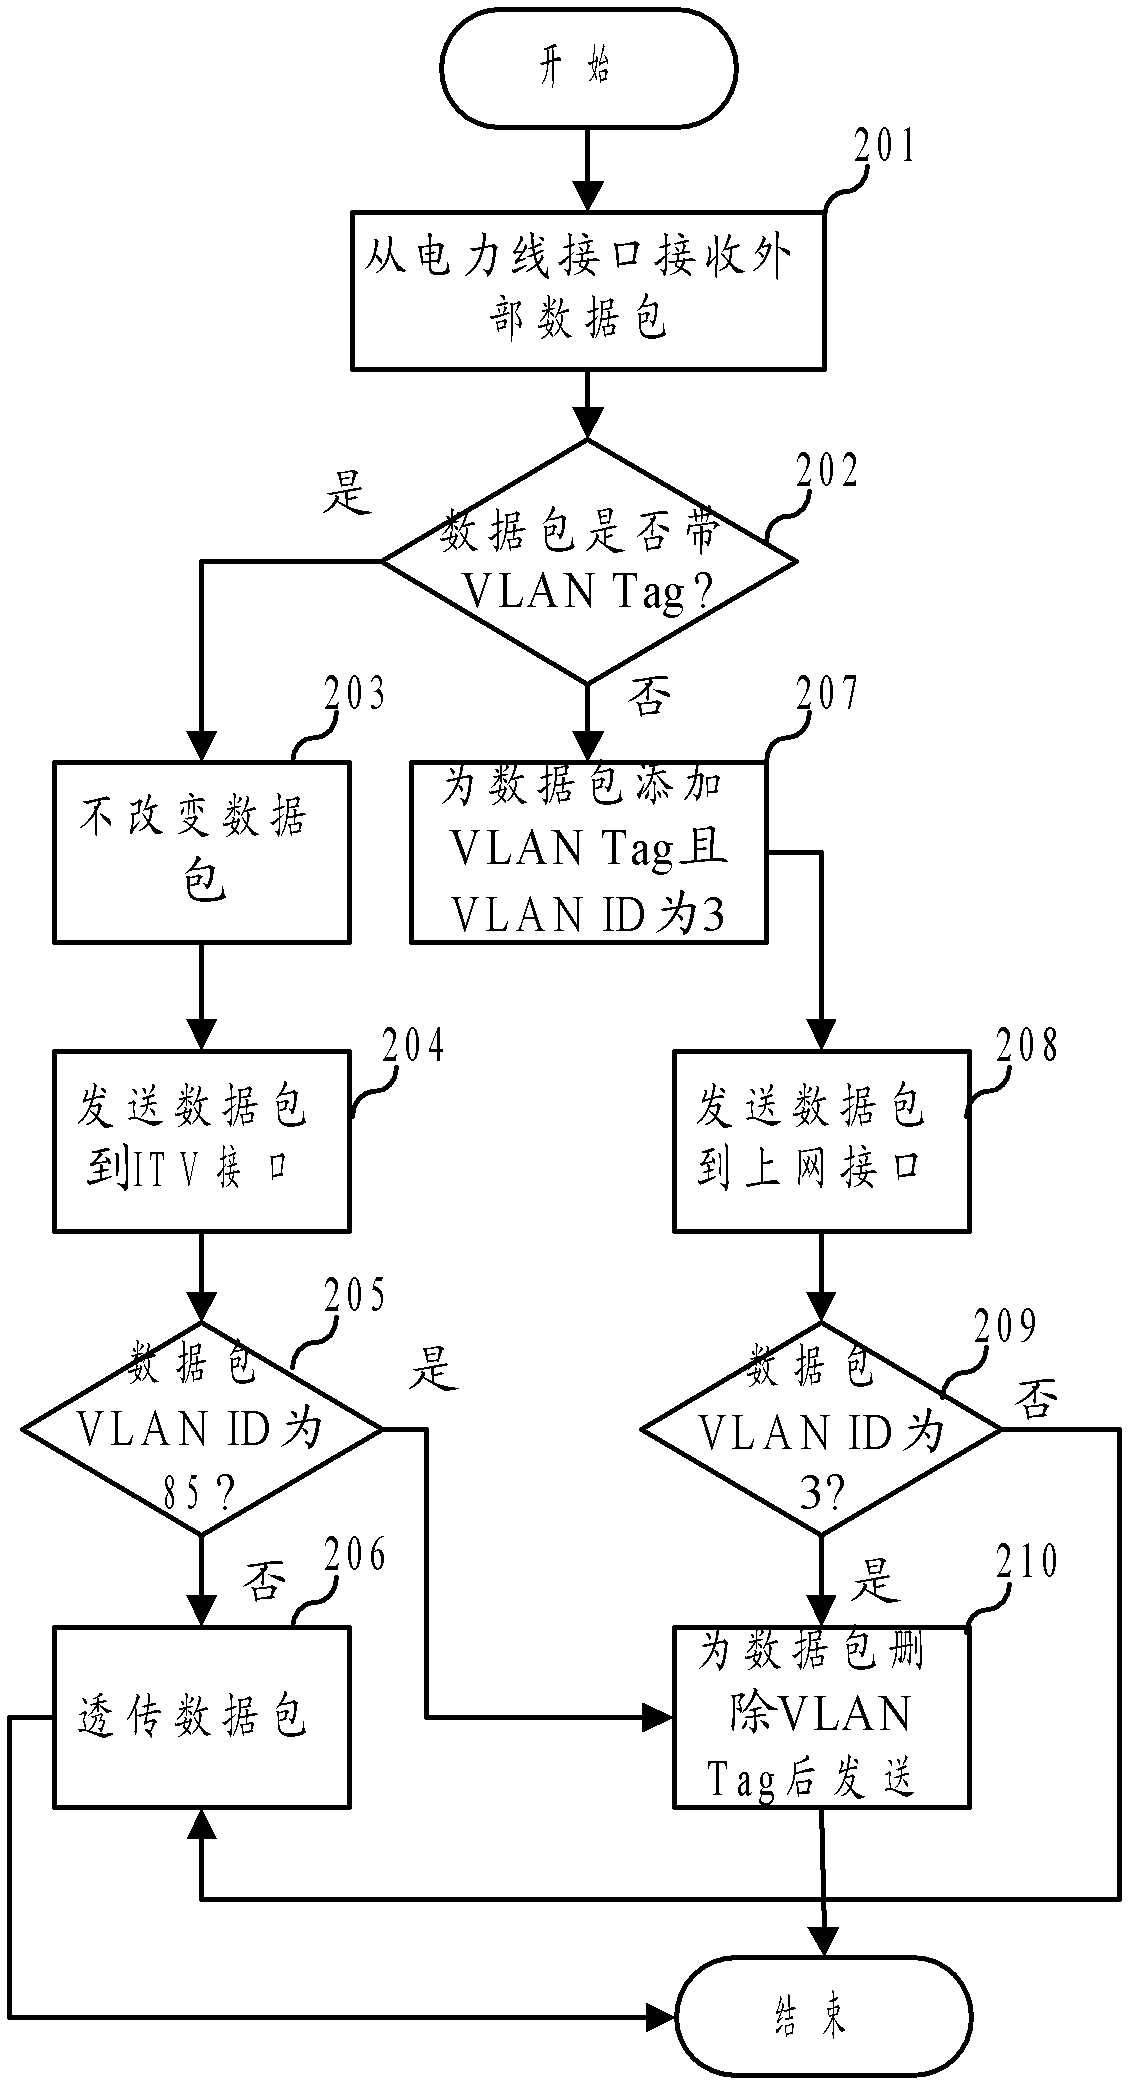 Multi-service carrying method for power line carrier communication wireless access point (AP) terminal device